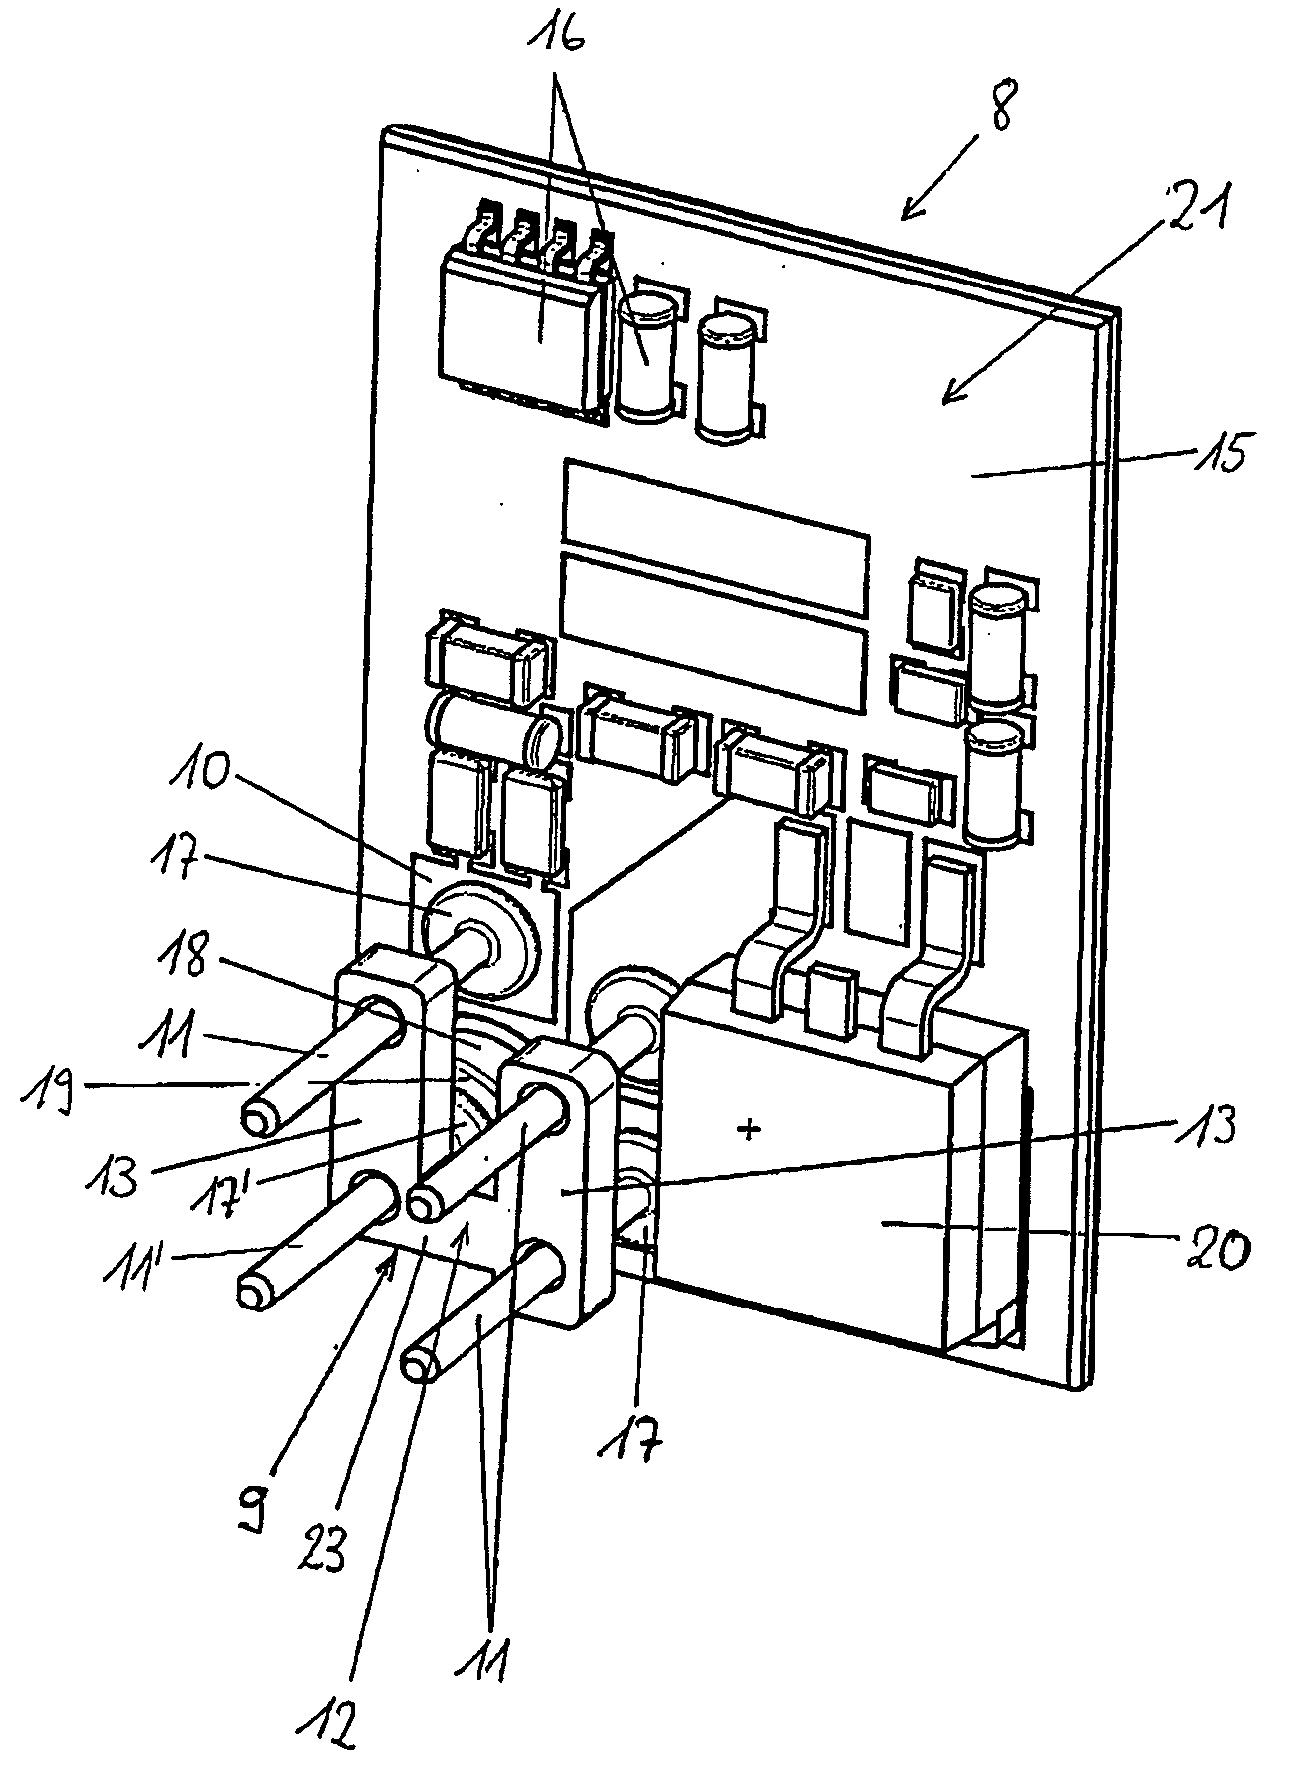 Electrical switch having an electrical connection element